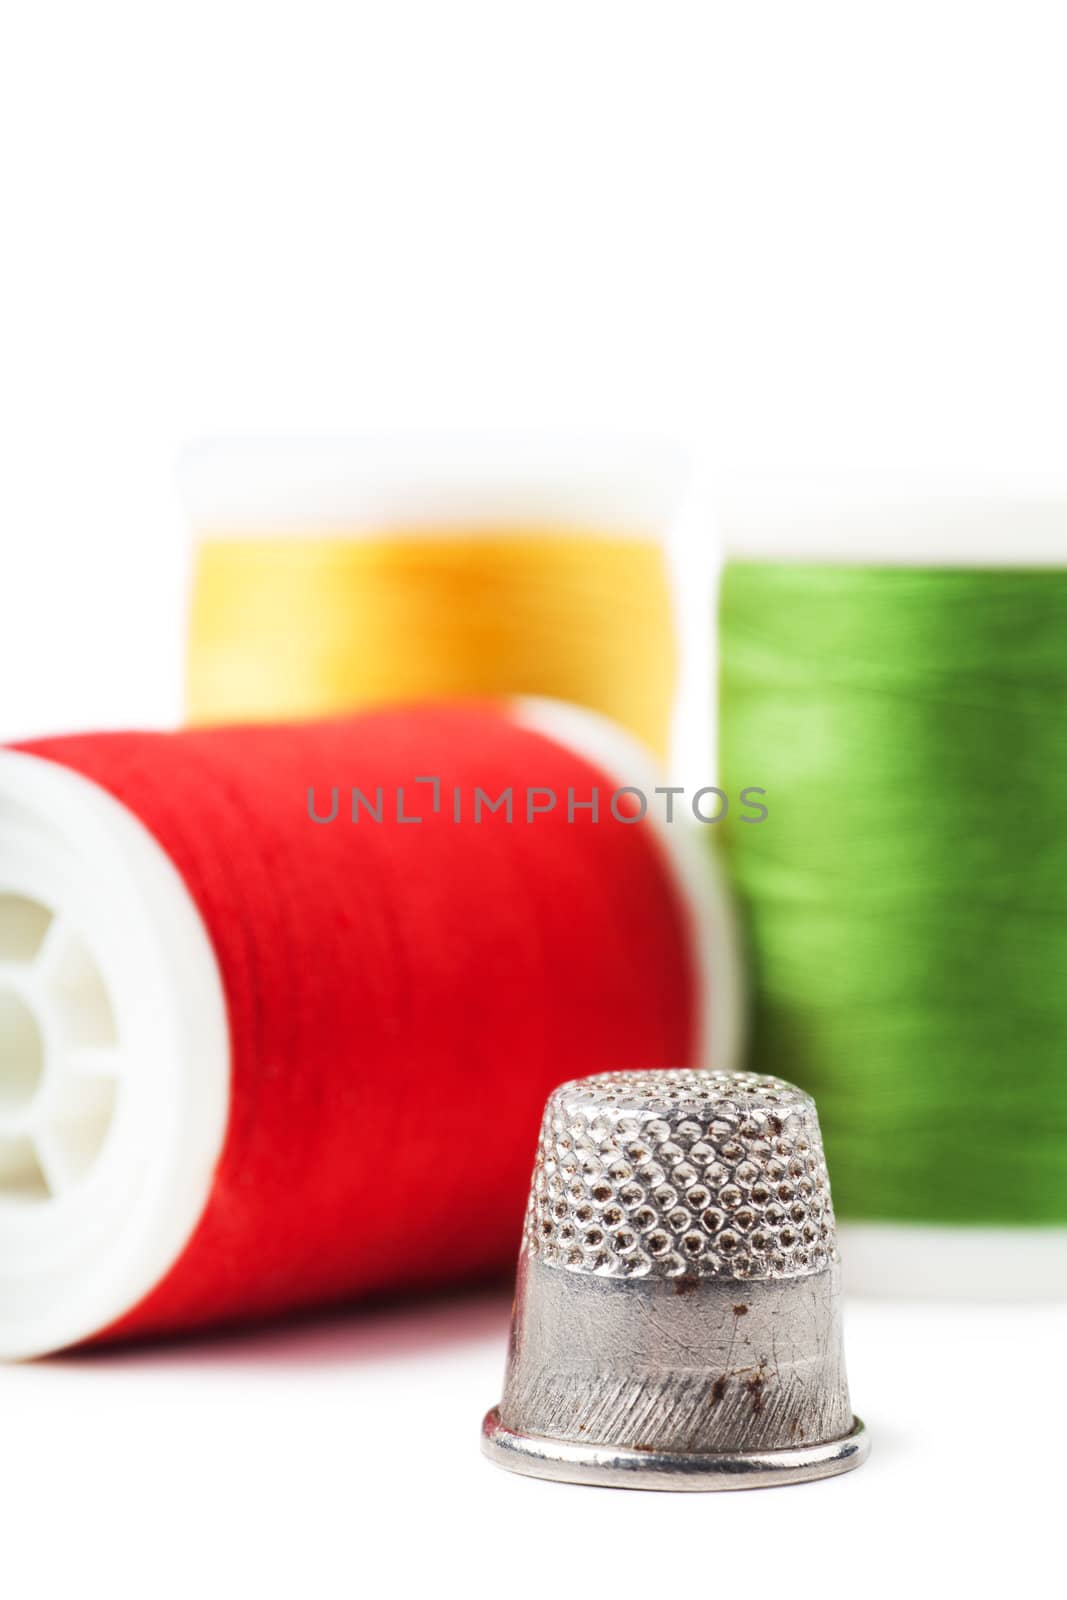 Closeup view of thimble and colorful spools over white background